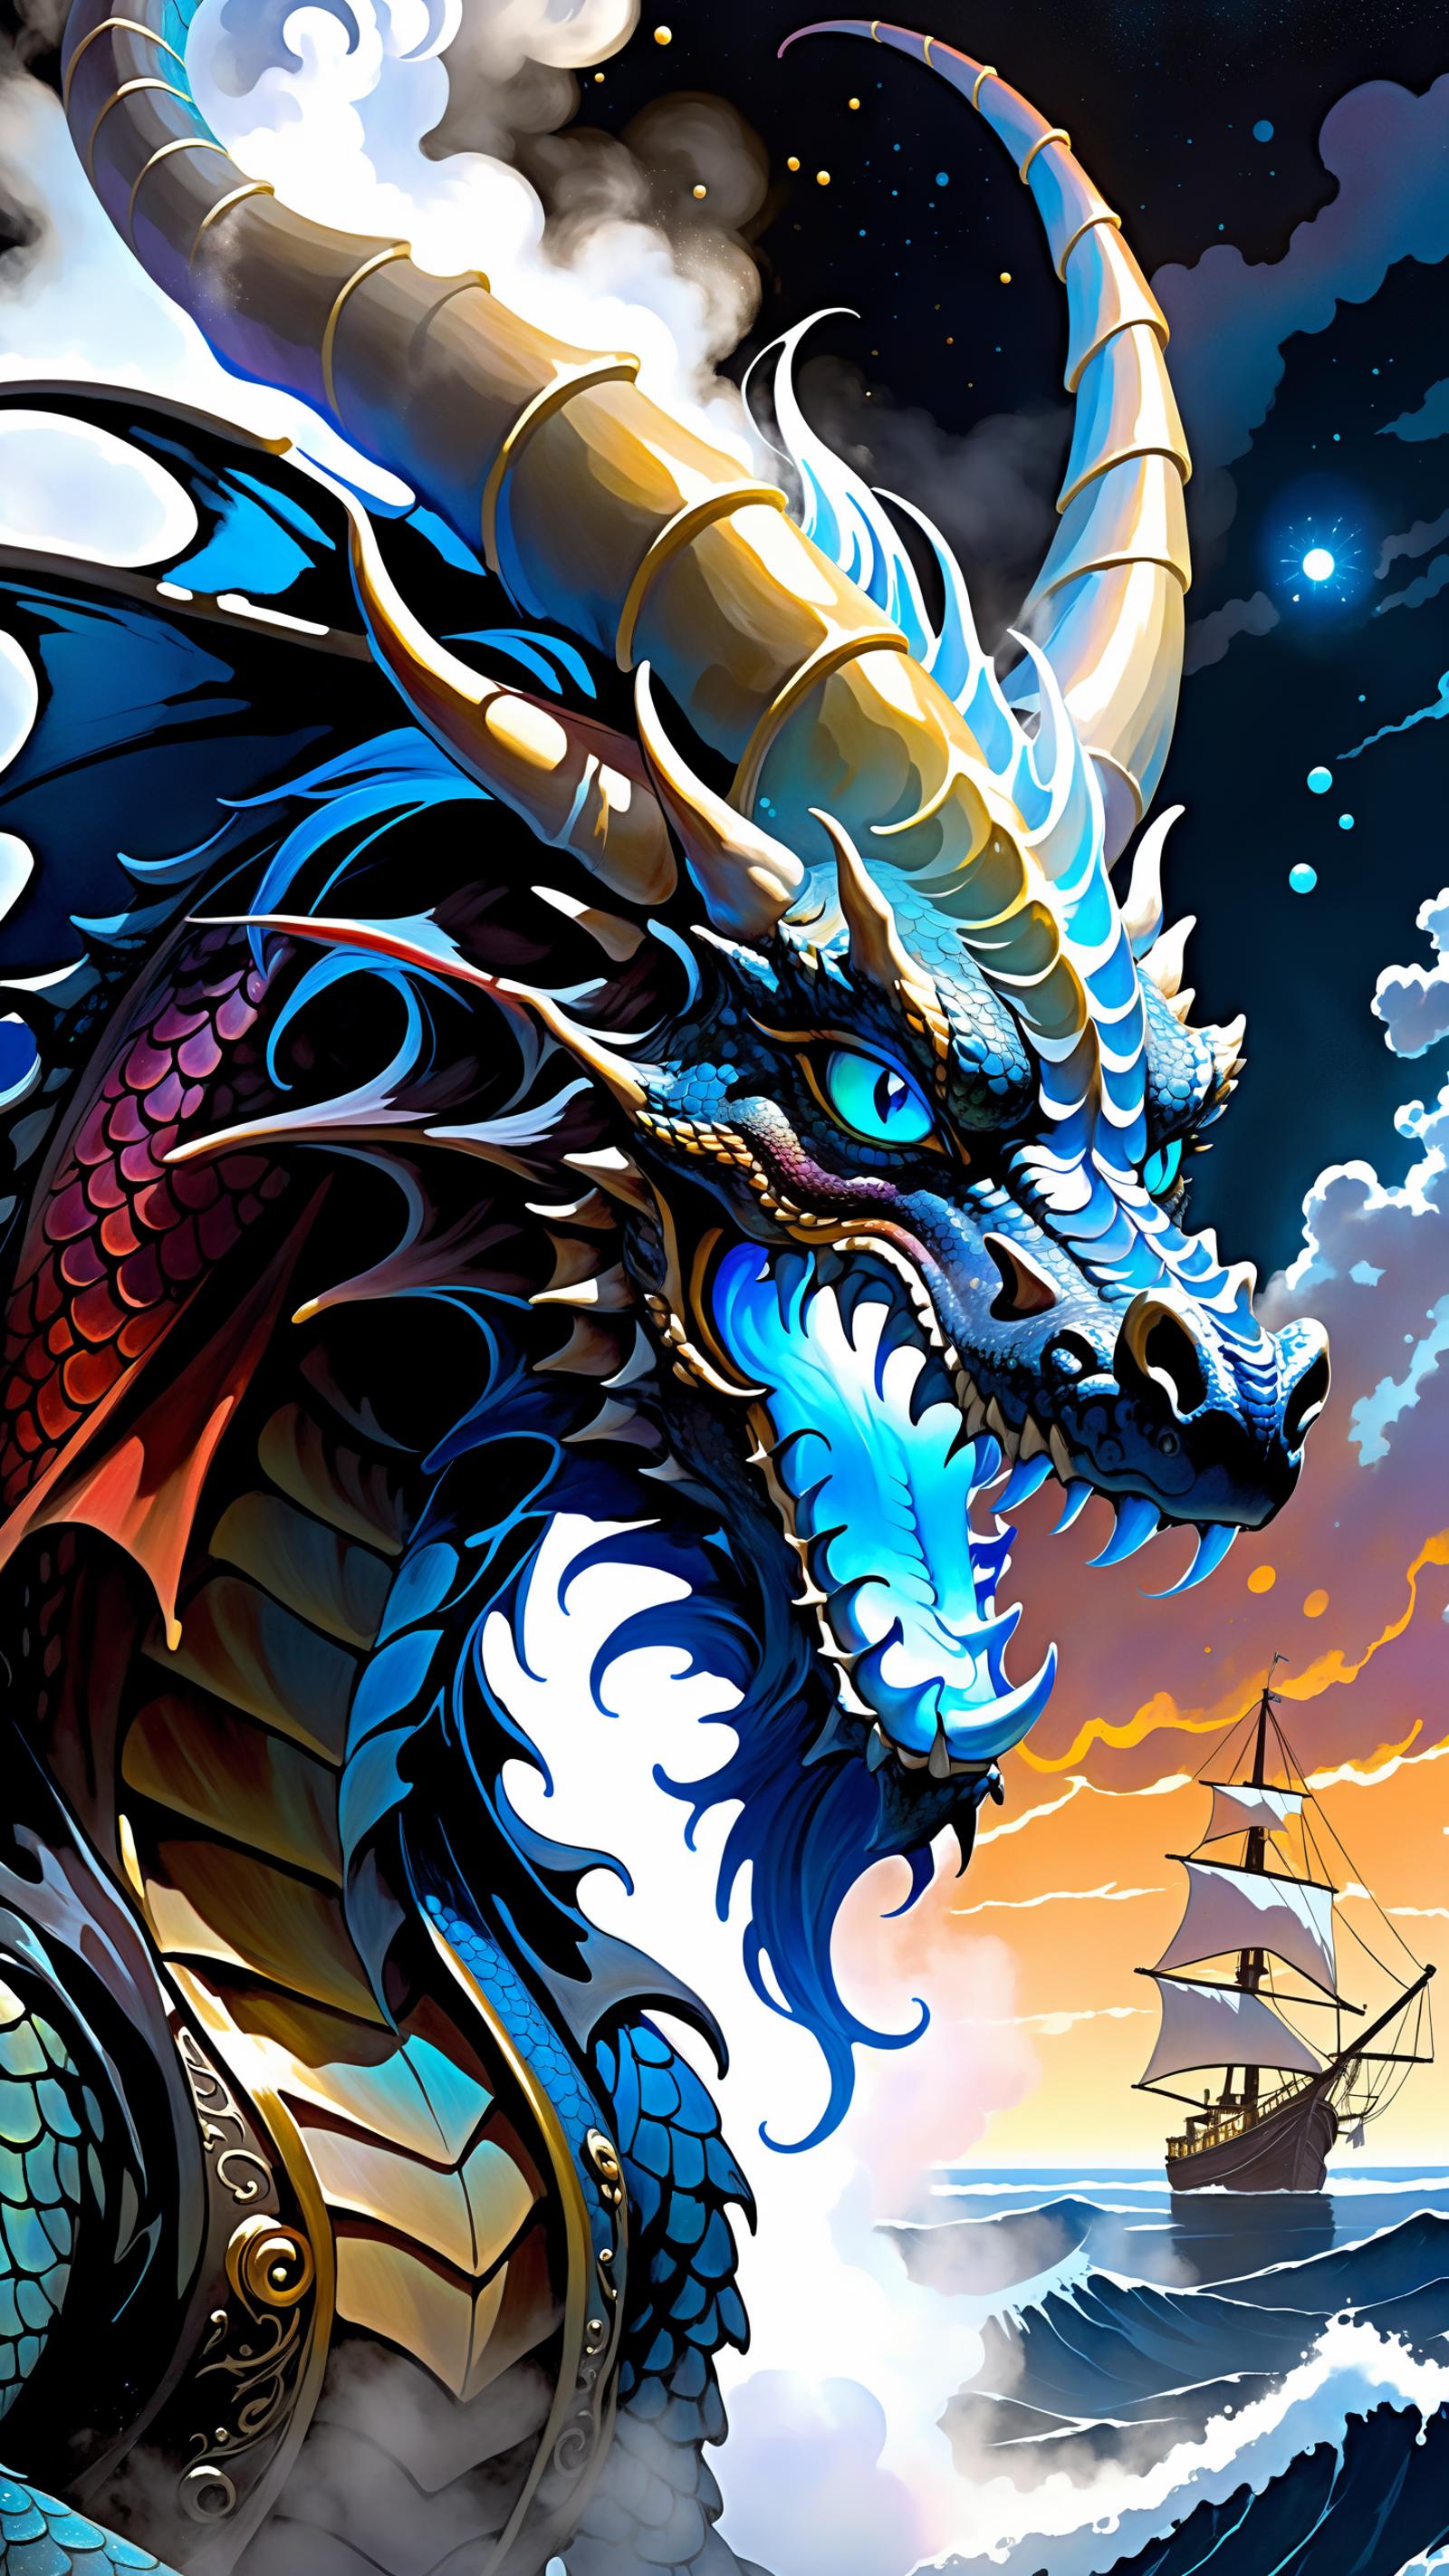 A Blue and Black Dragon with Blue Eyes and Gold Horns on a Dark Sky with a Boat in the Background.